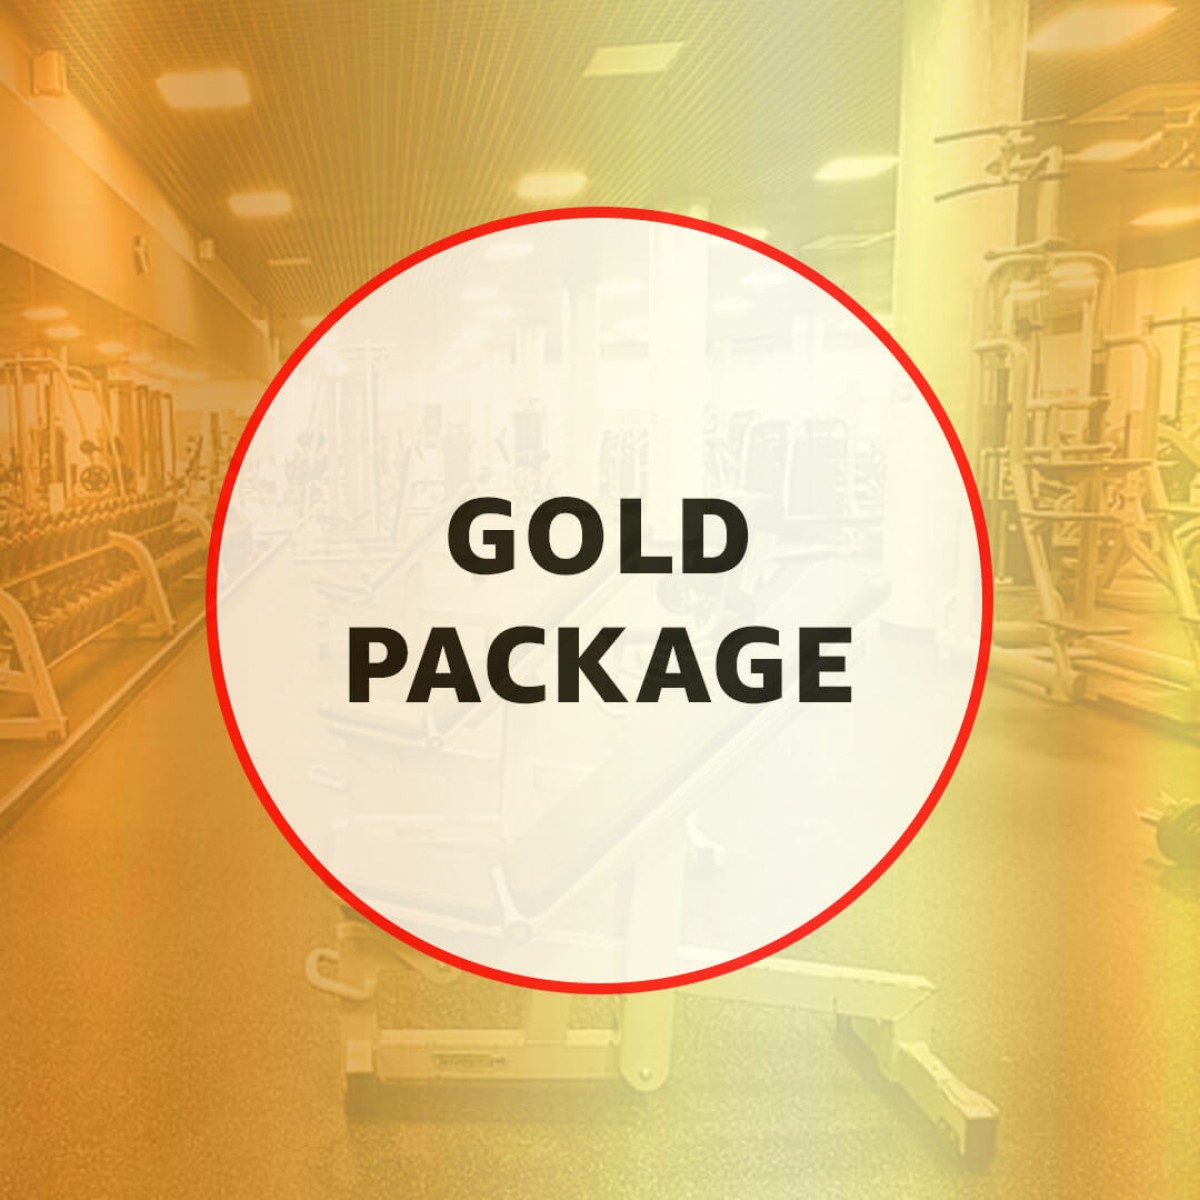 Society, Building & Club House - Gold Package